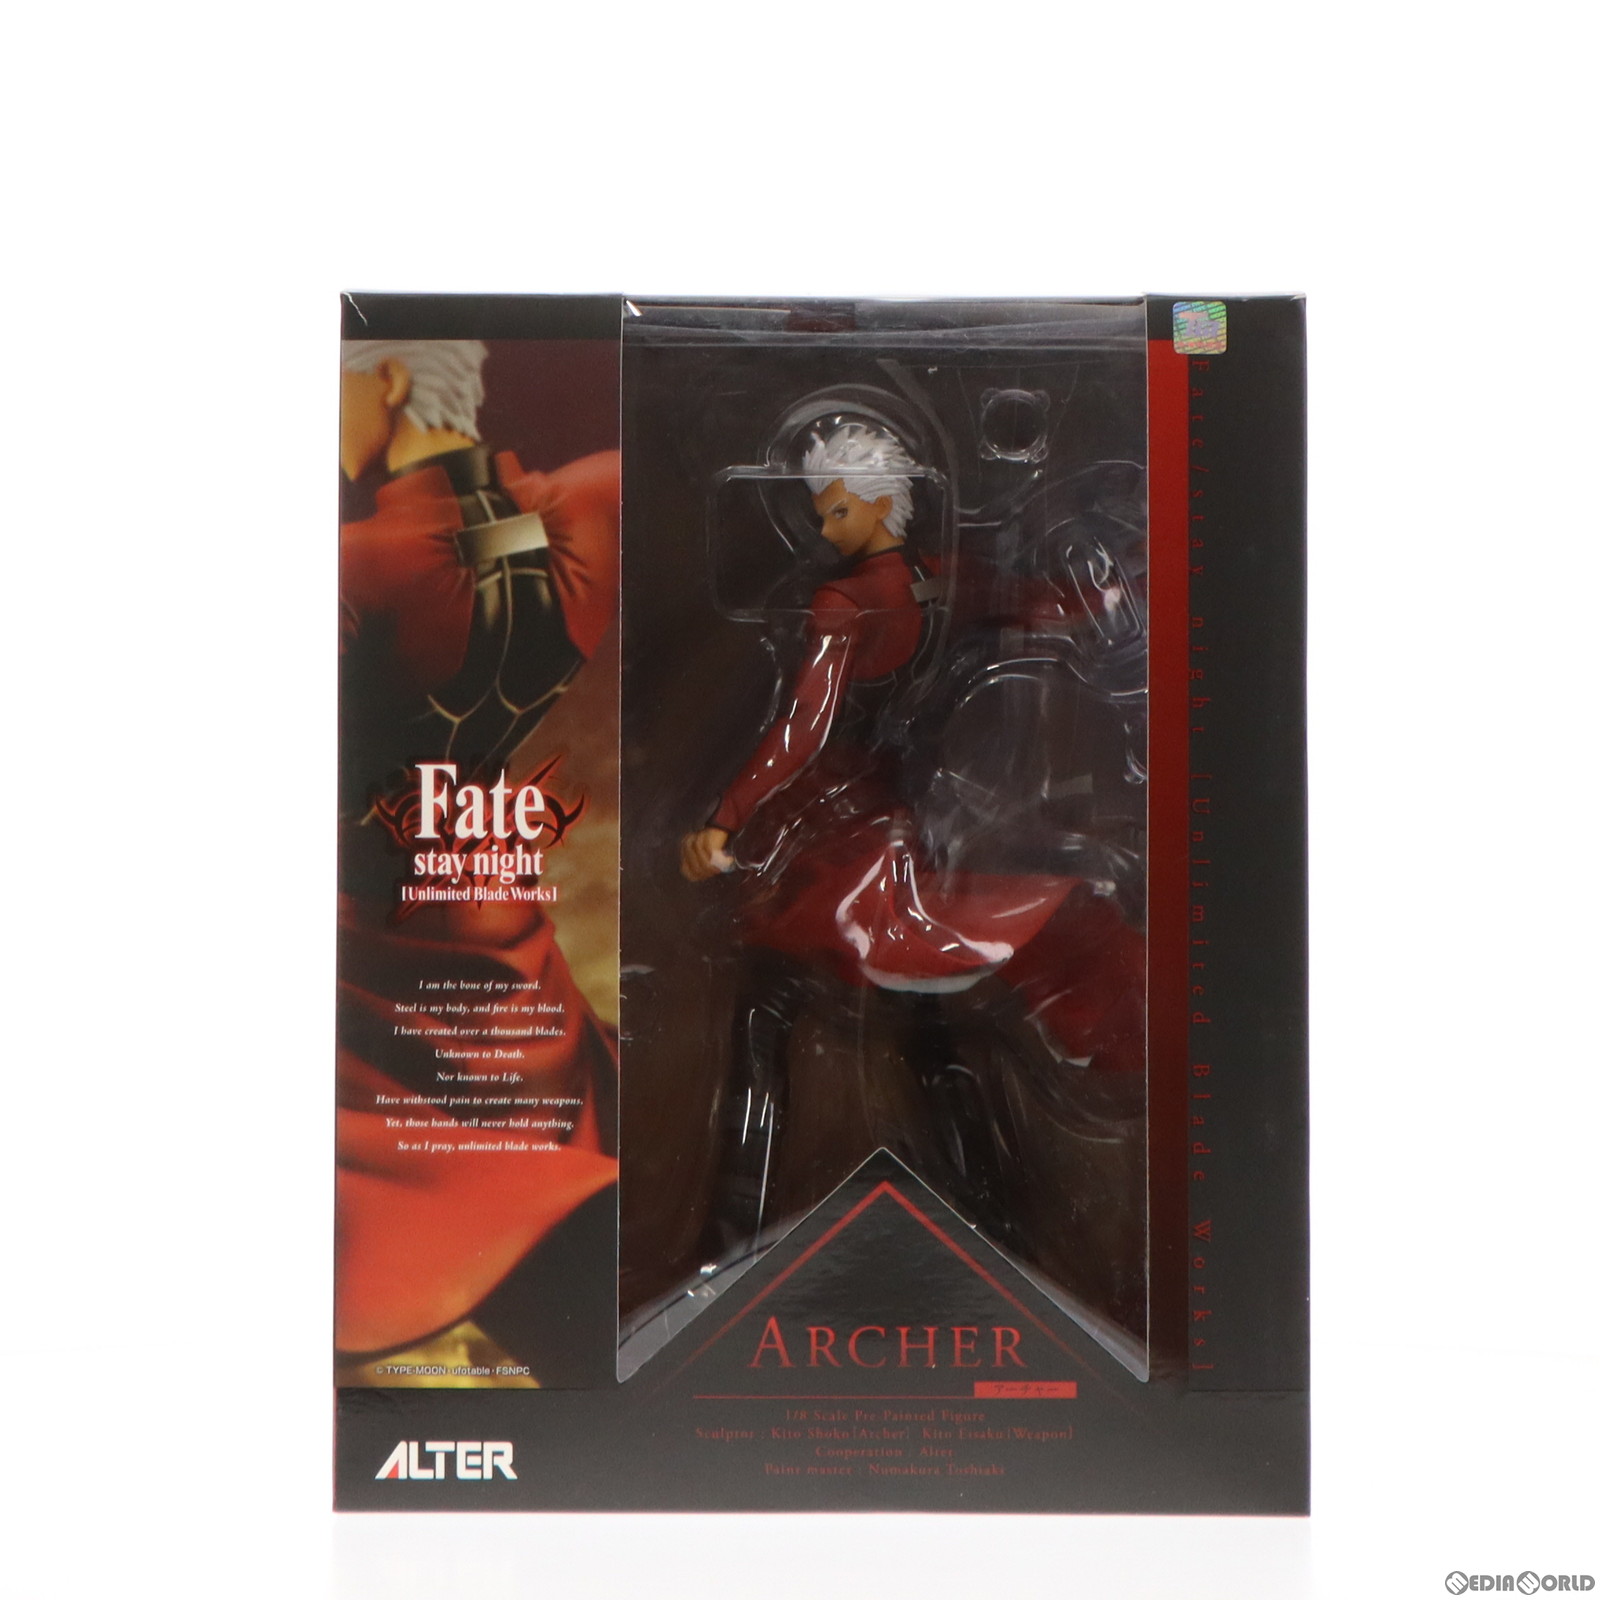 Fate/stay night [Unlimited Blade Works] アーチャー （1/8スケール フィギュア） [アルター］の商品画像